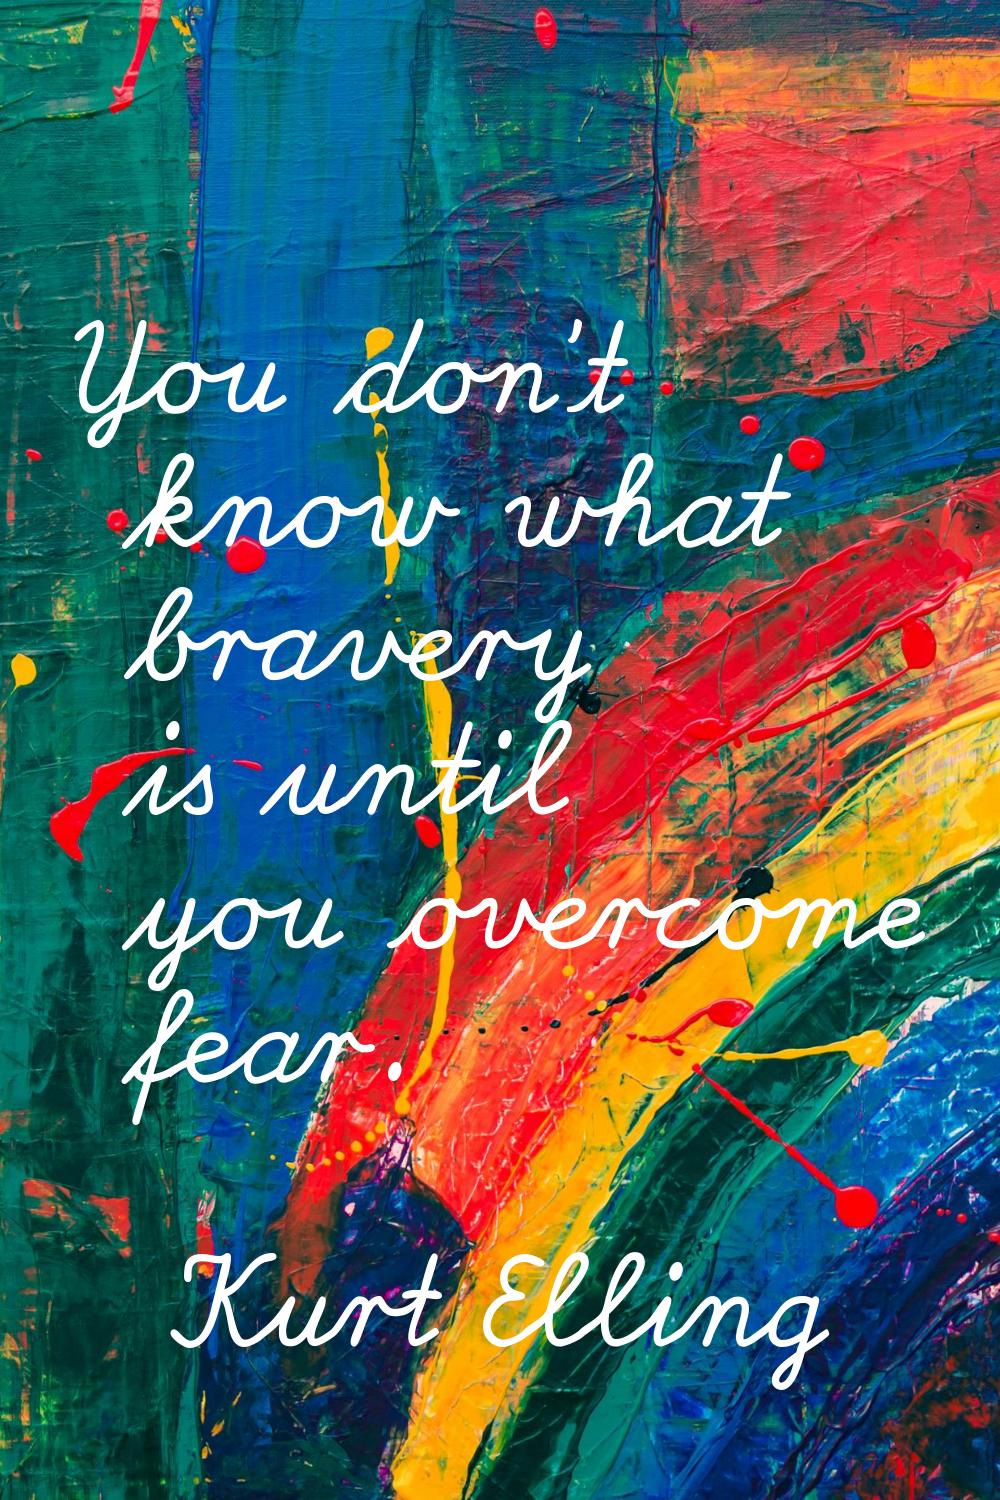 You don't know what bravery is until you overcome fear.